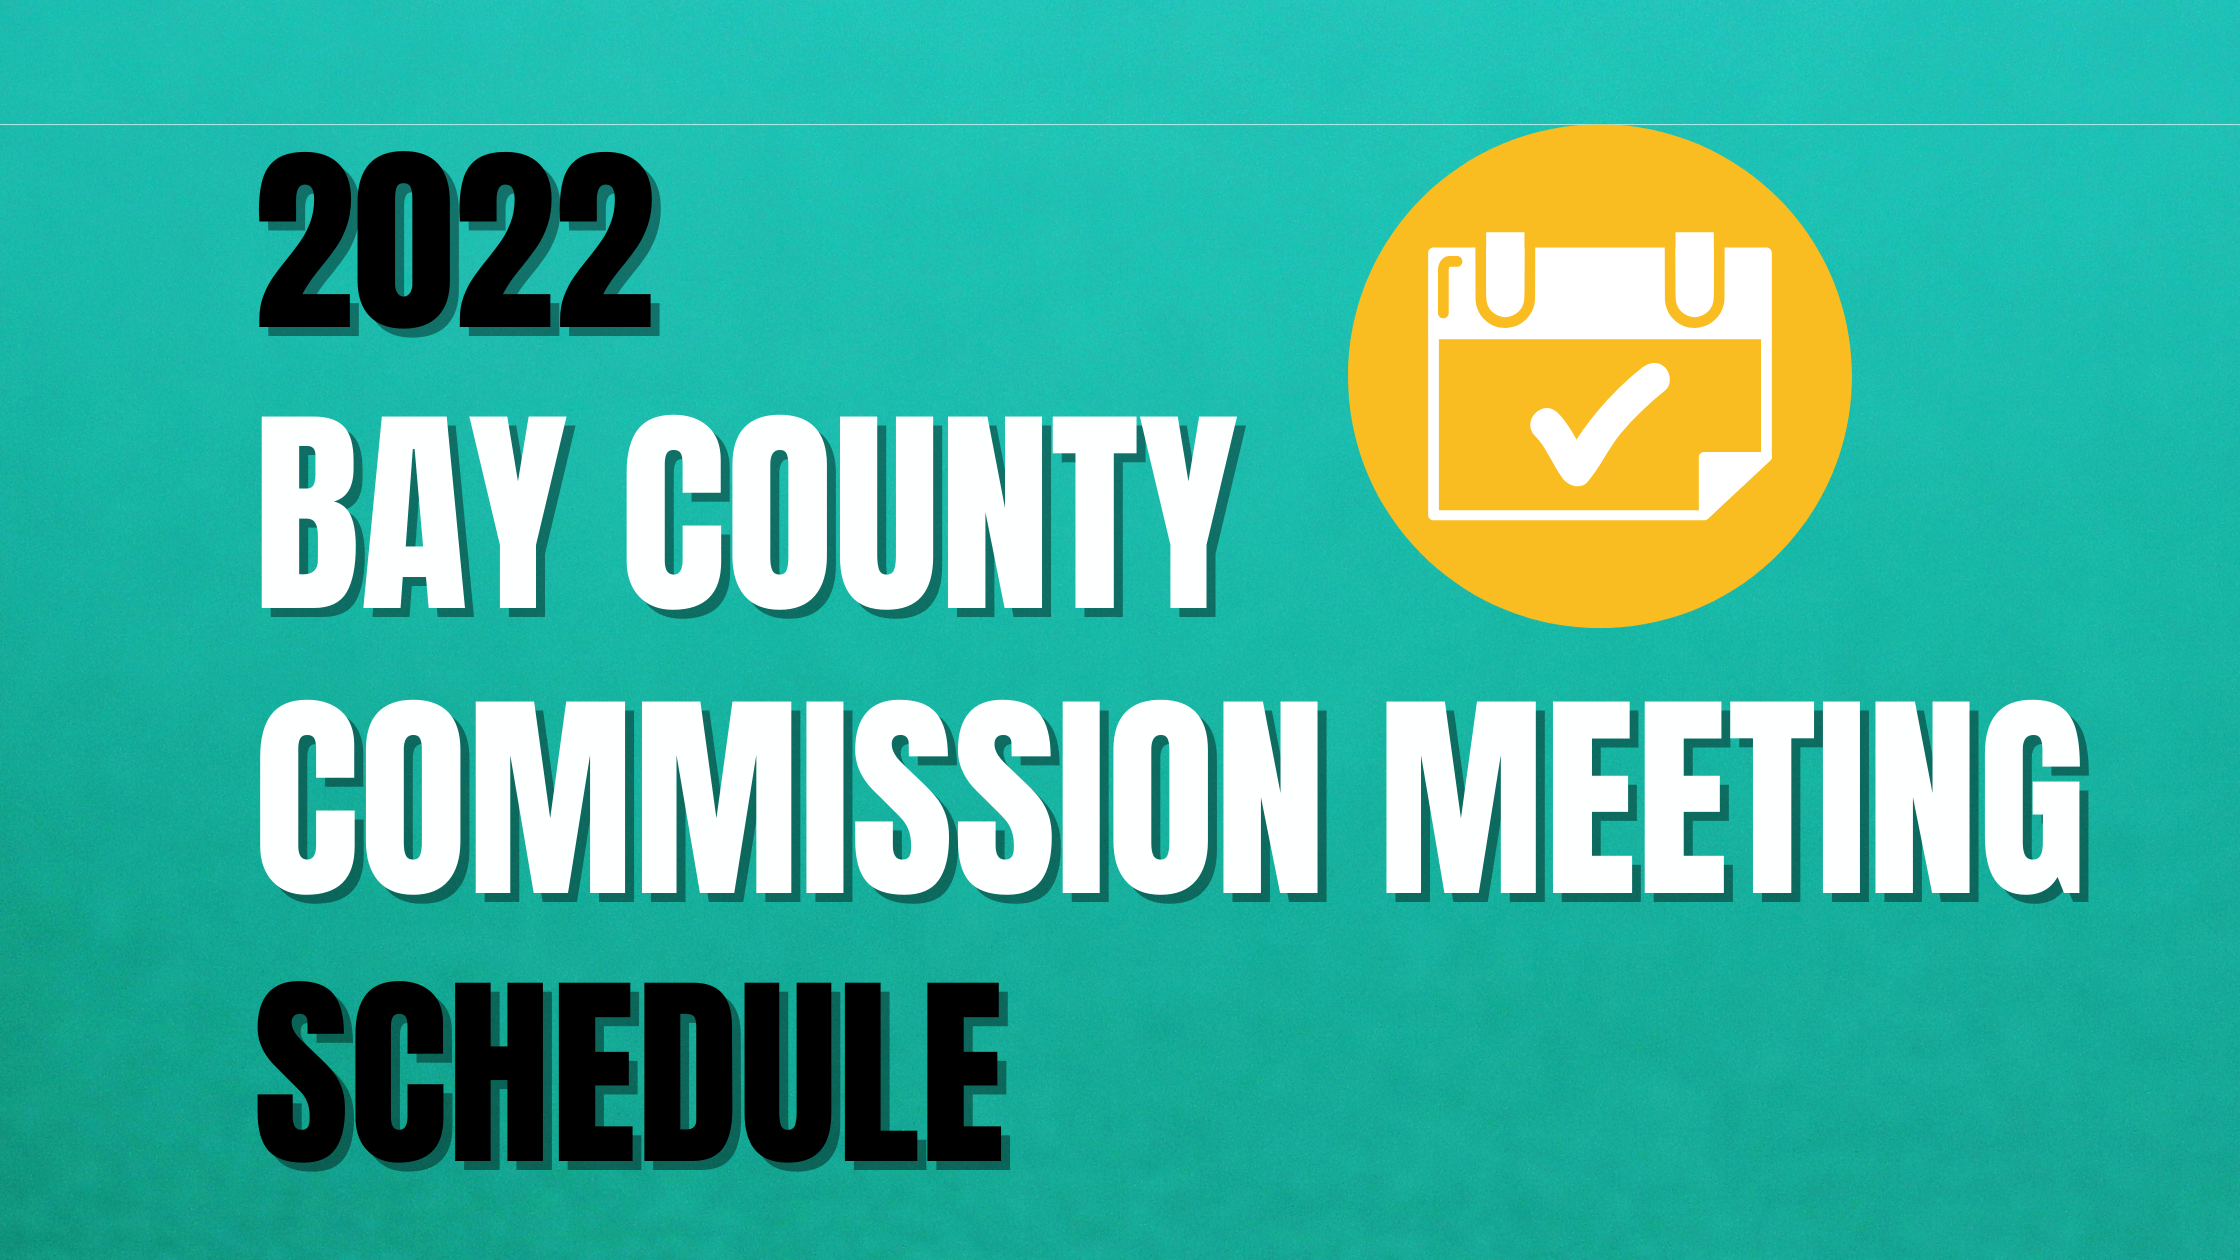 2022 BAY COUNTY COMMISSION MEETING SCHEDULE